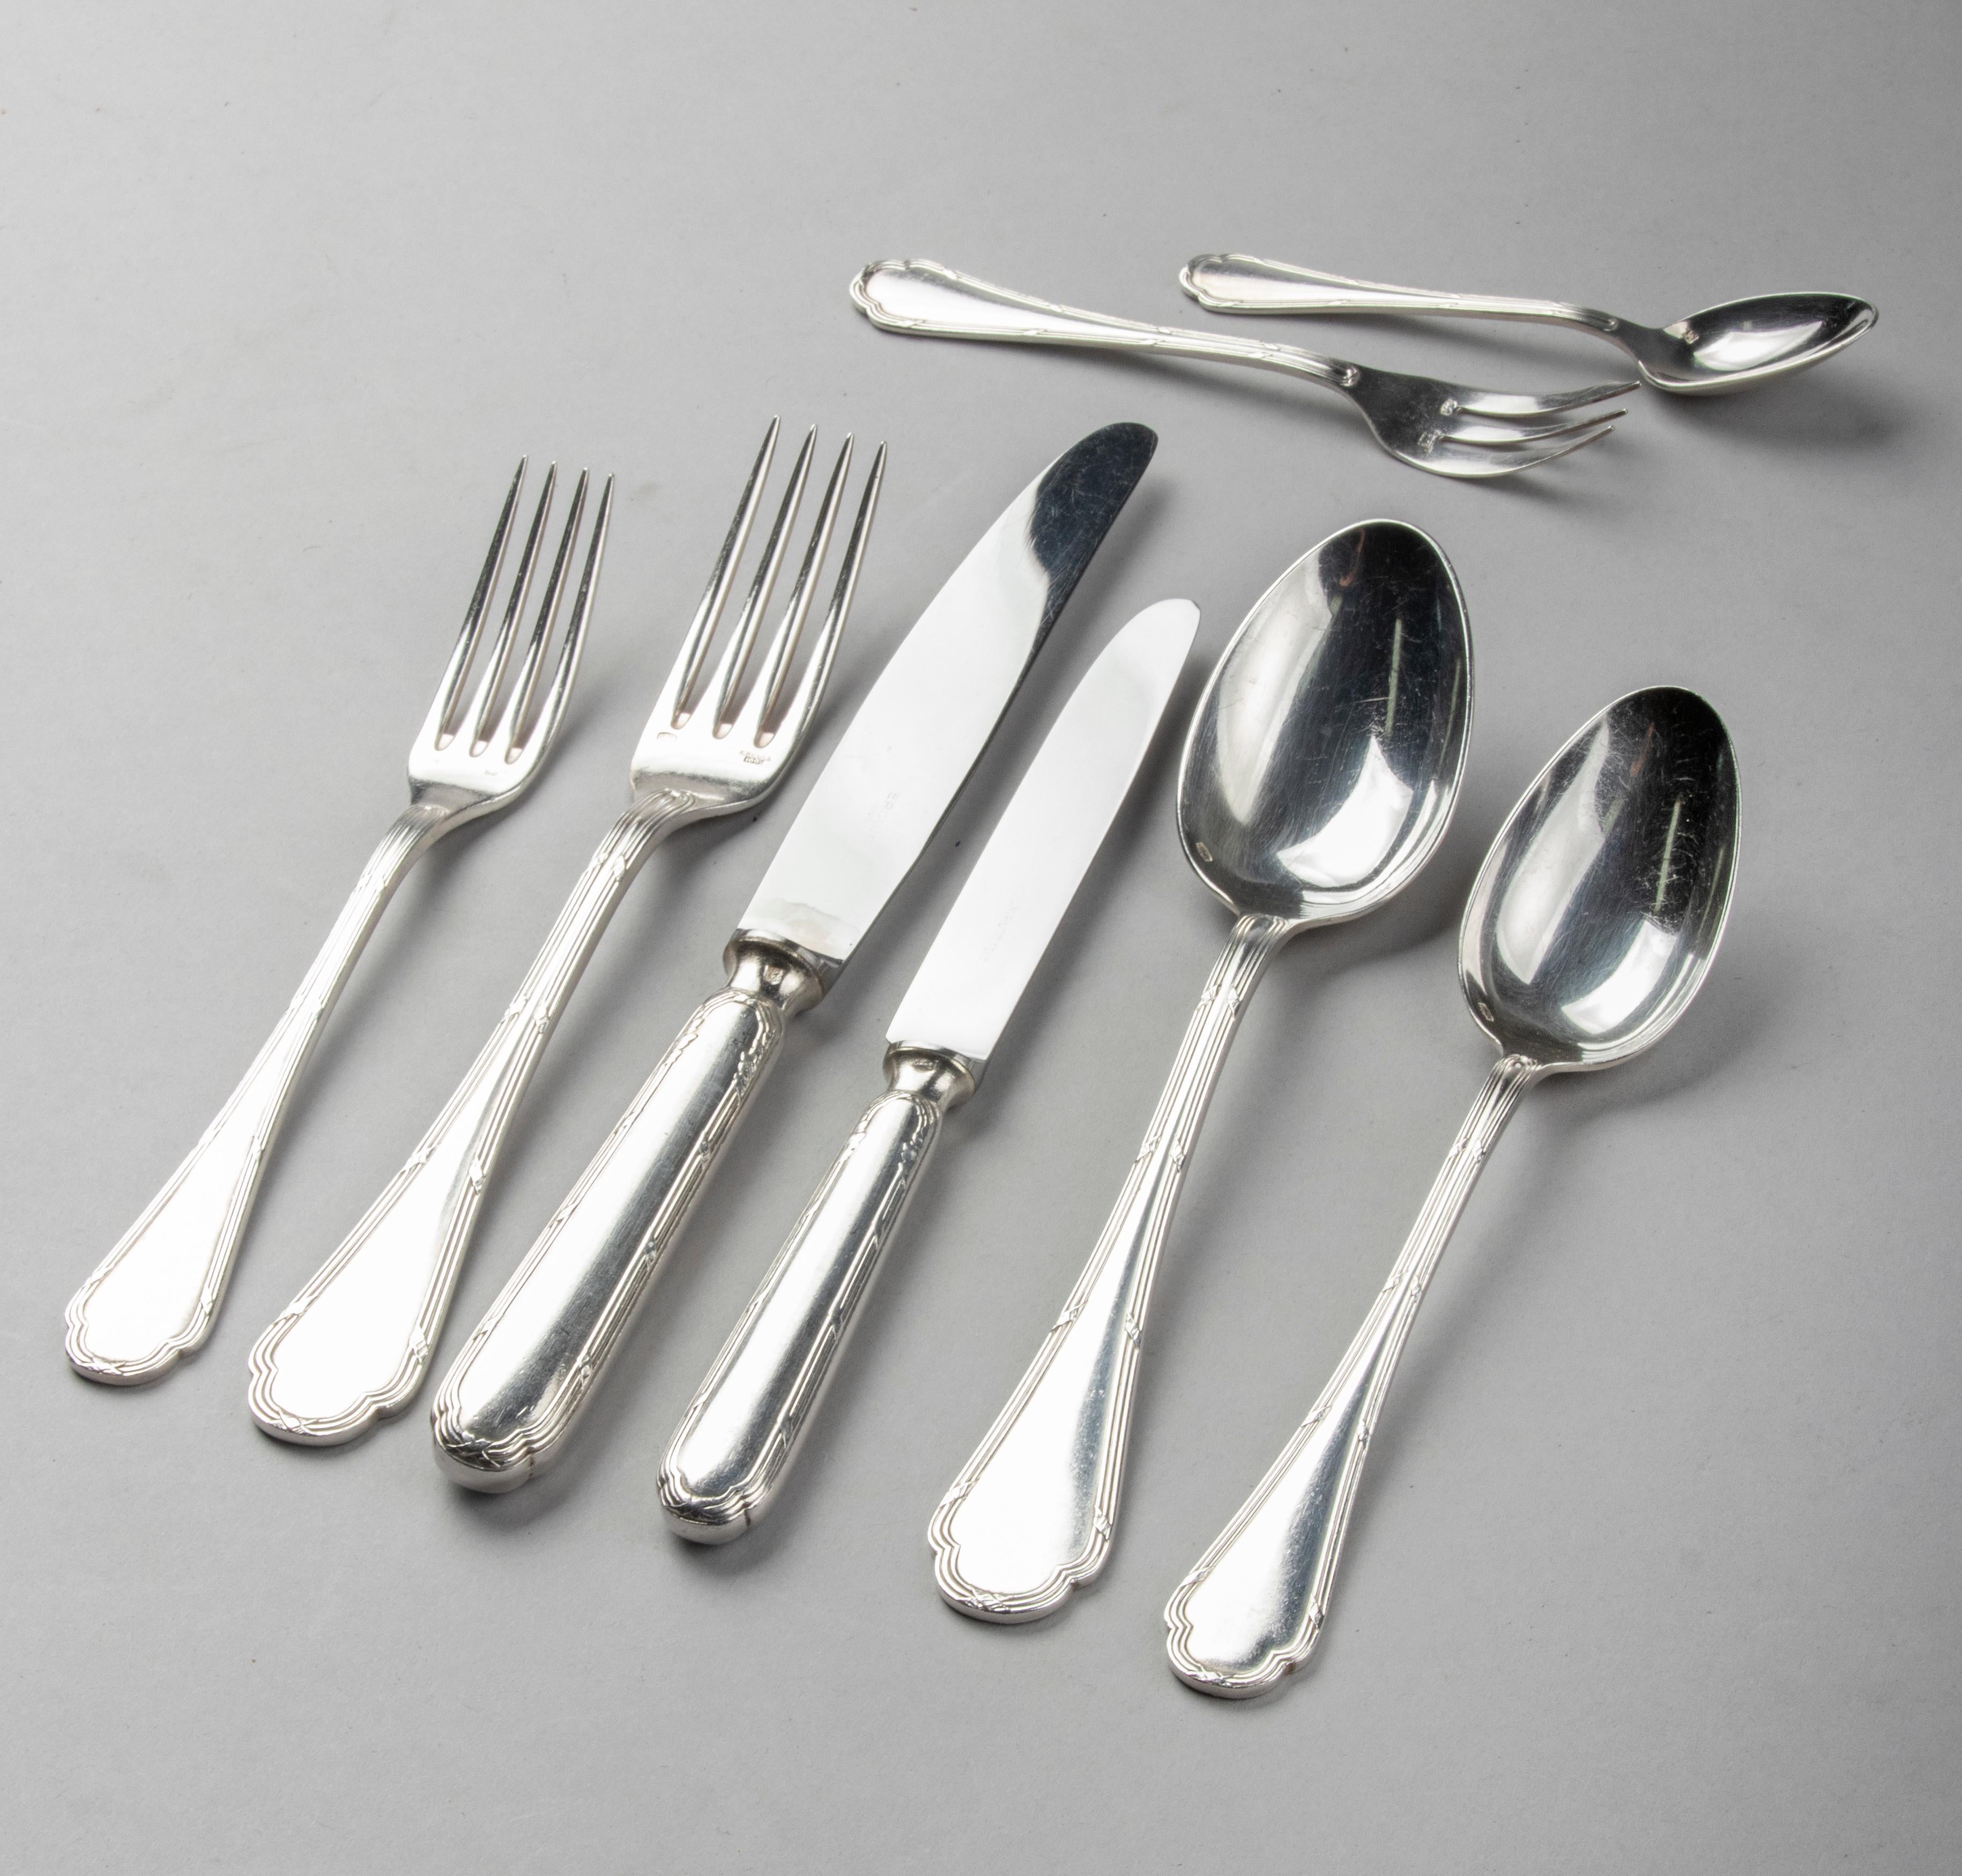 96-Piece Set of Silver-Plate Flatware for 12 Persons, Ercuis Model Ribbon 12